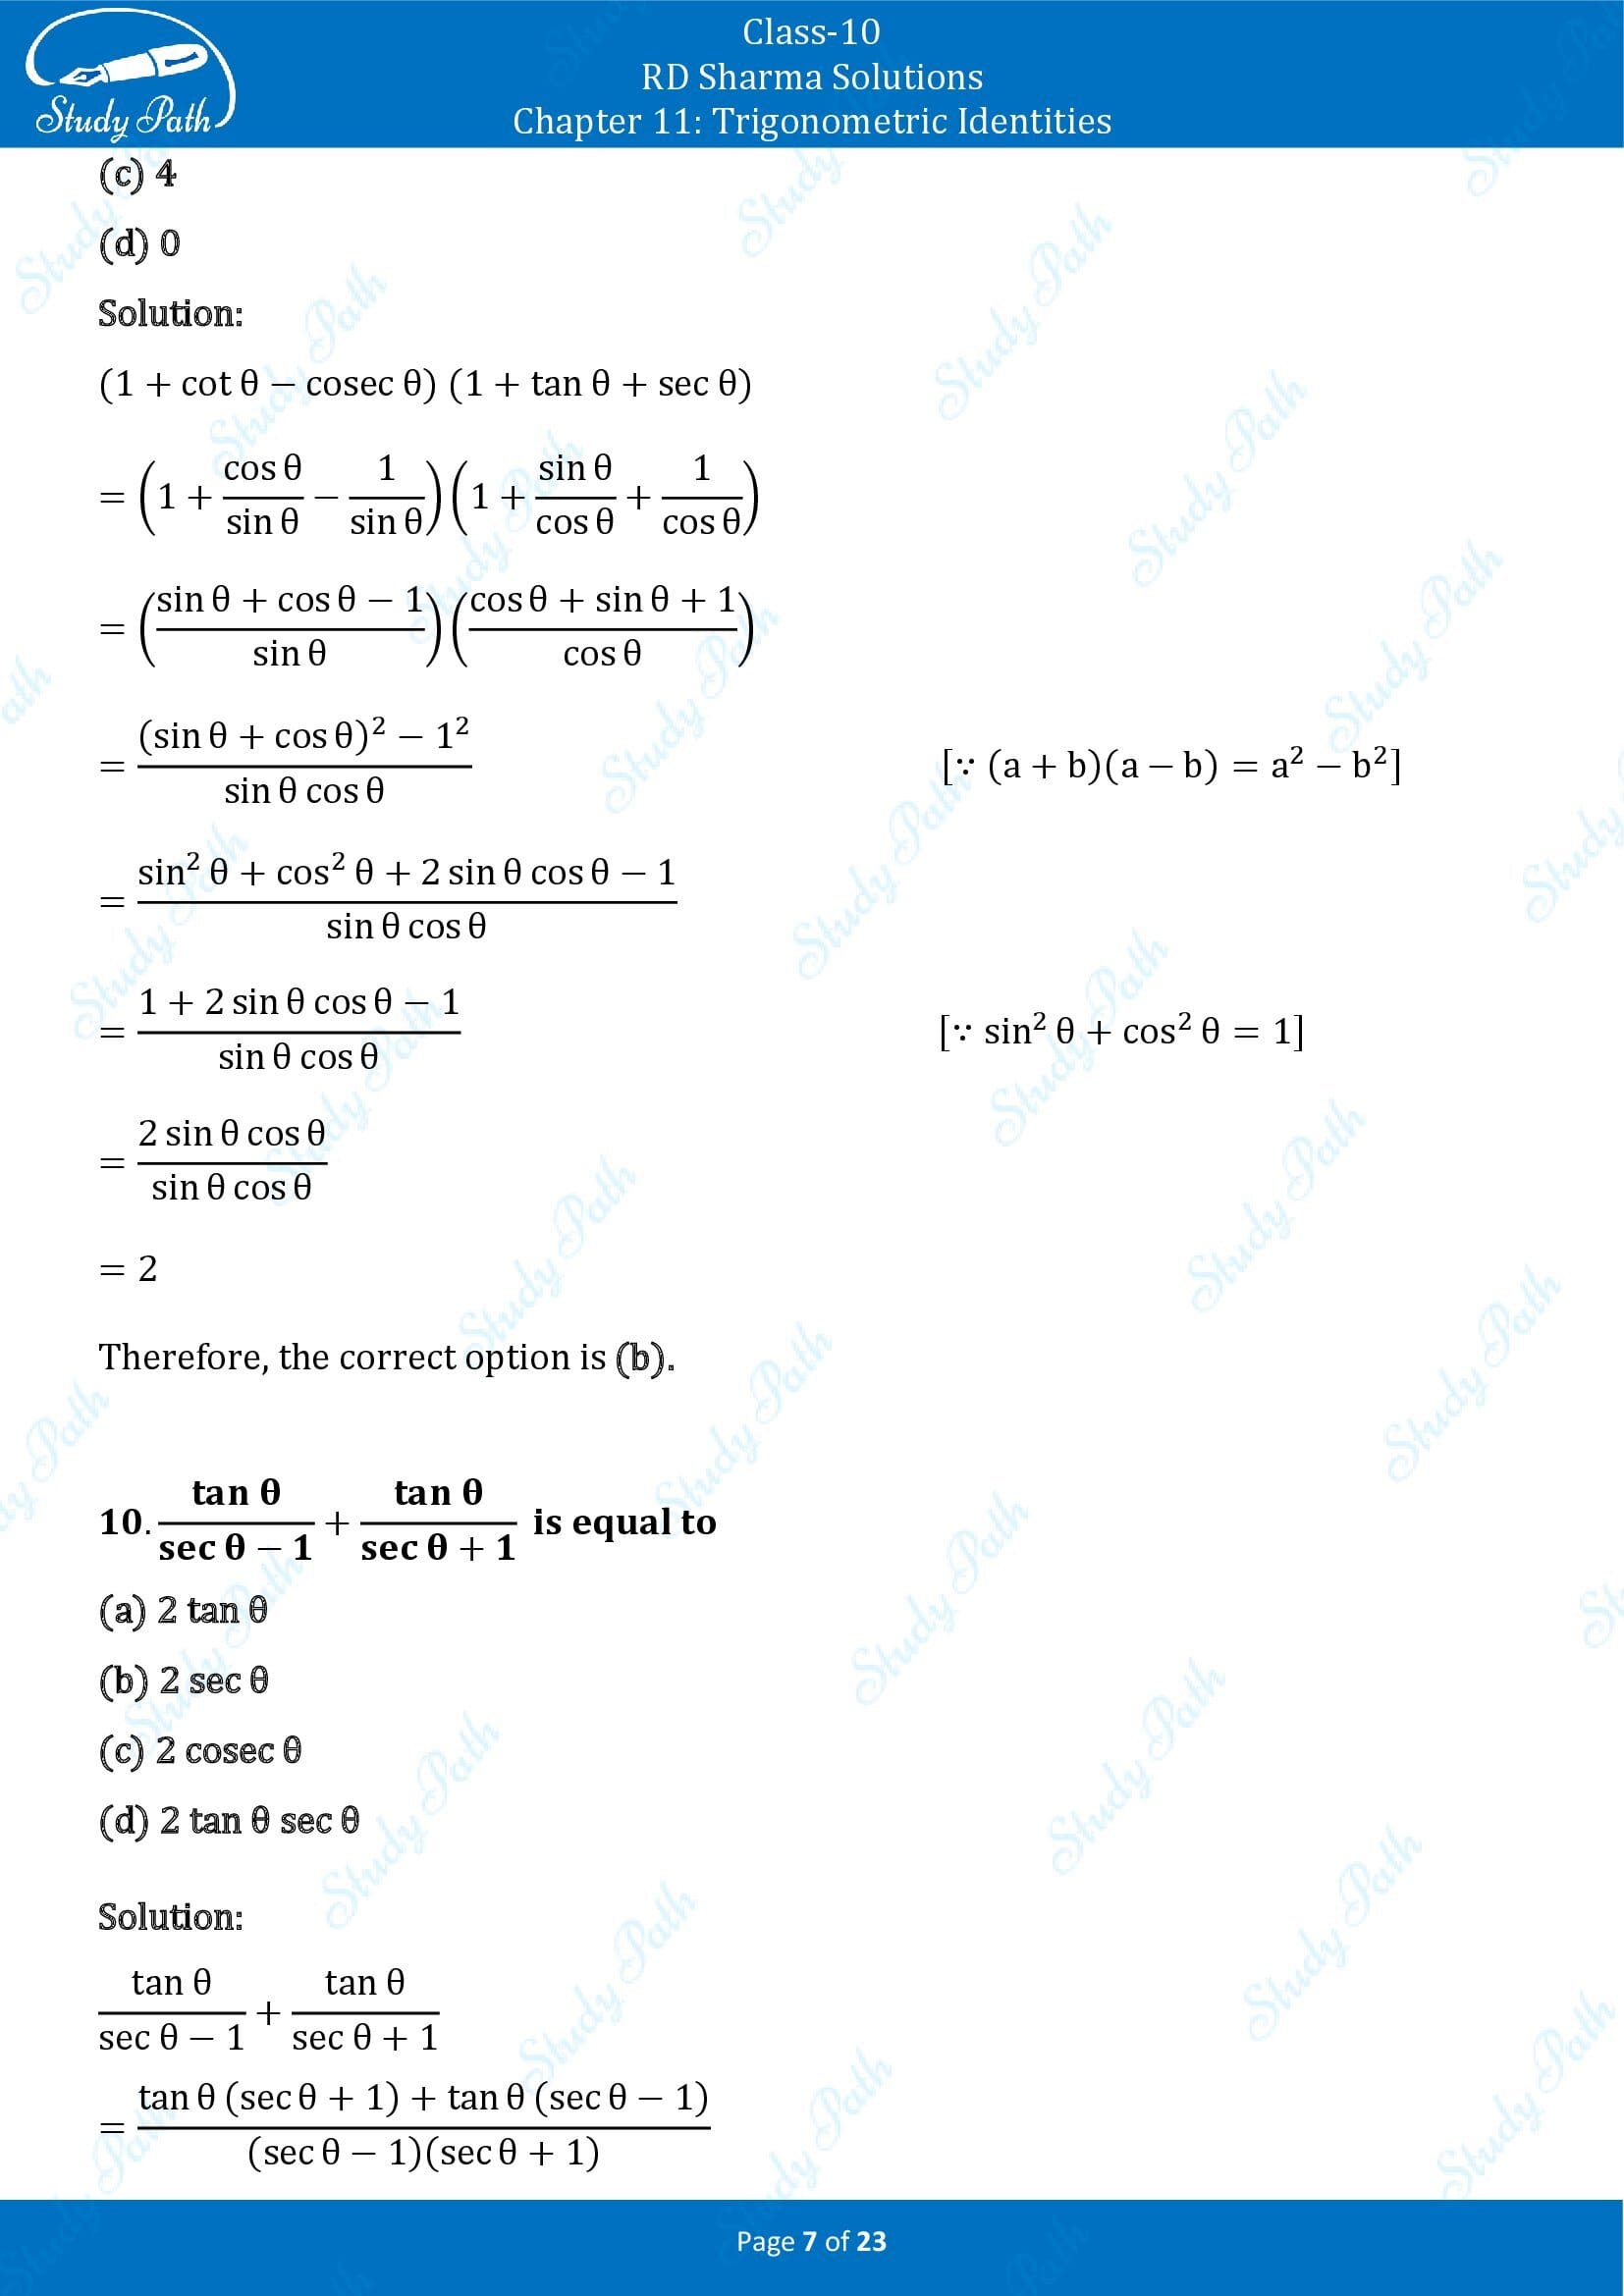 RD Sharma Solutions Class 10 Chapter 11 Trigonometric Identities Multiple Choice Questions MCQs 00007